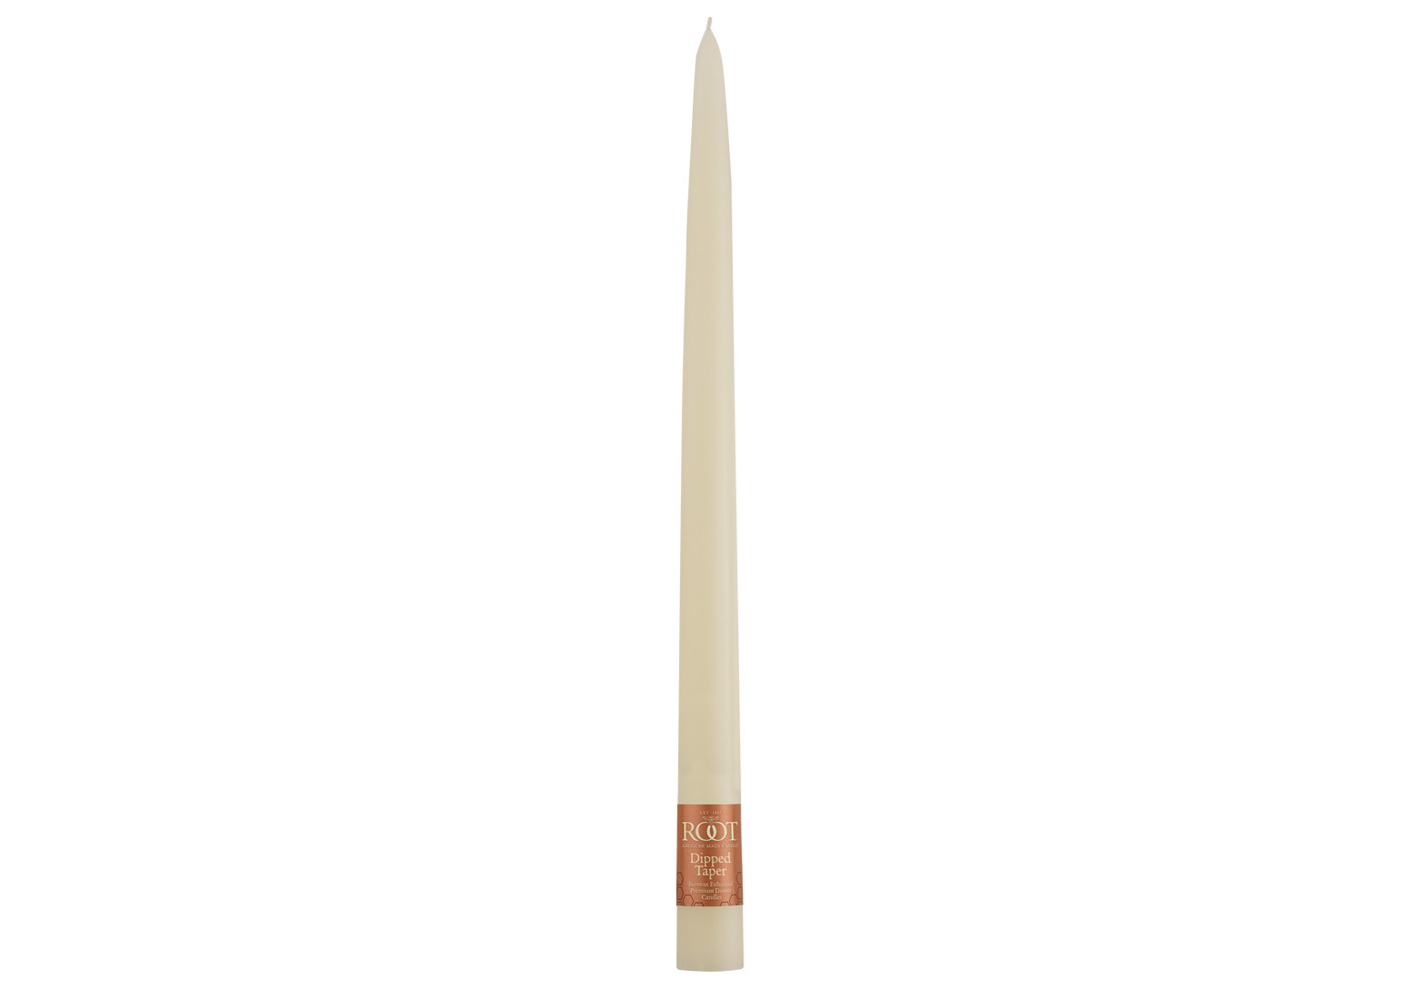 Gray Taper Dinner Candle 12 in.